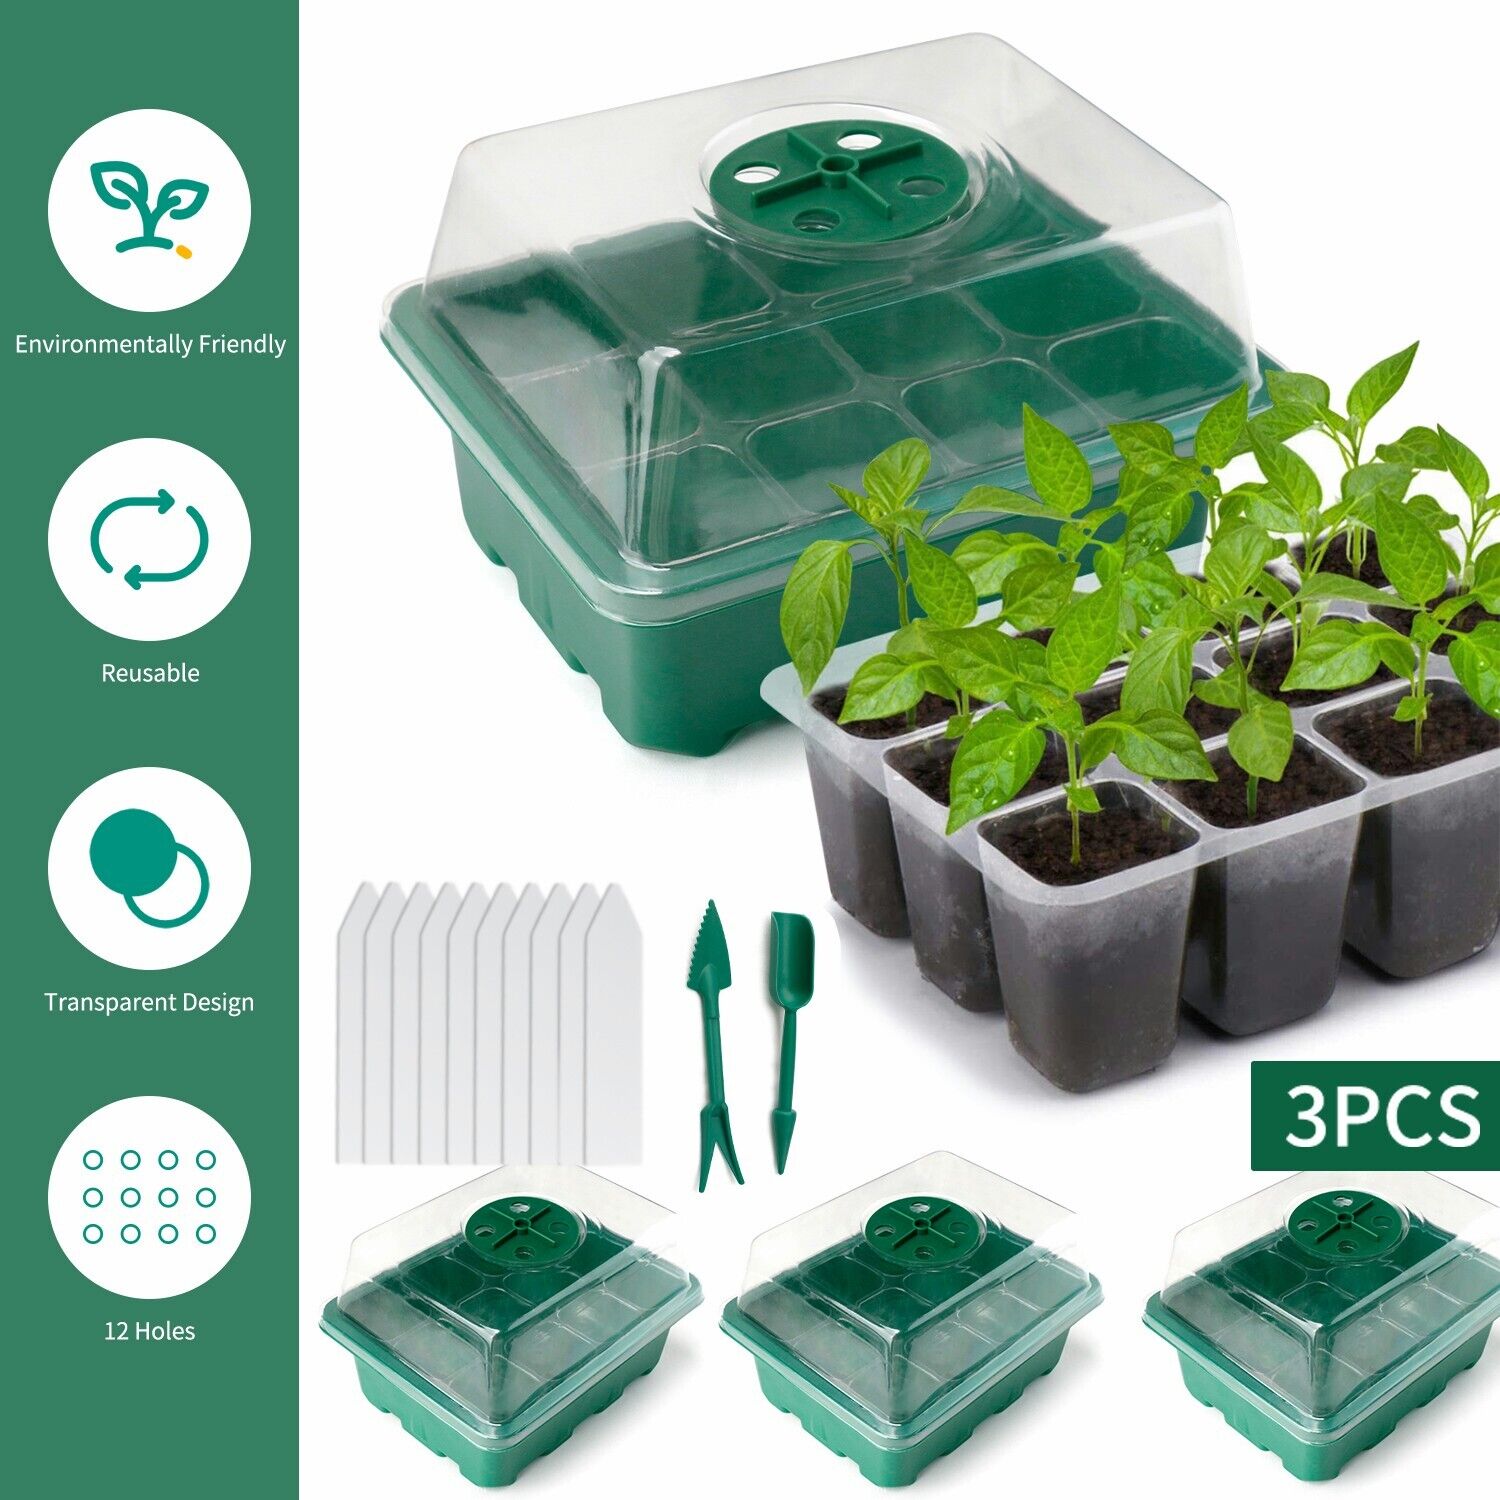 3Pack Seedling Tray Plant Seed Starter Trays Humidity Adjustable Kit In/Outdoor